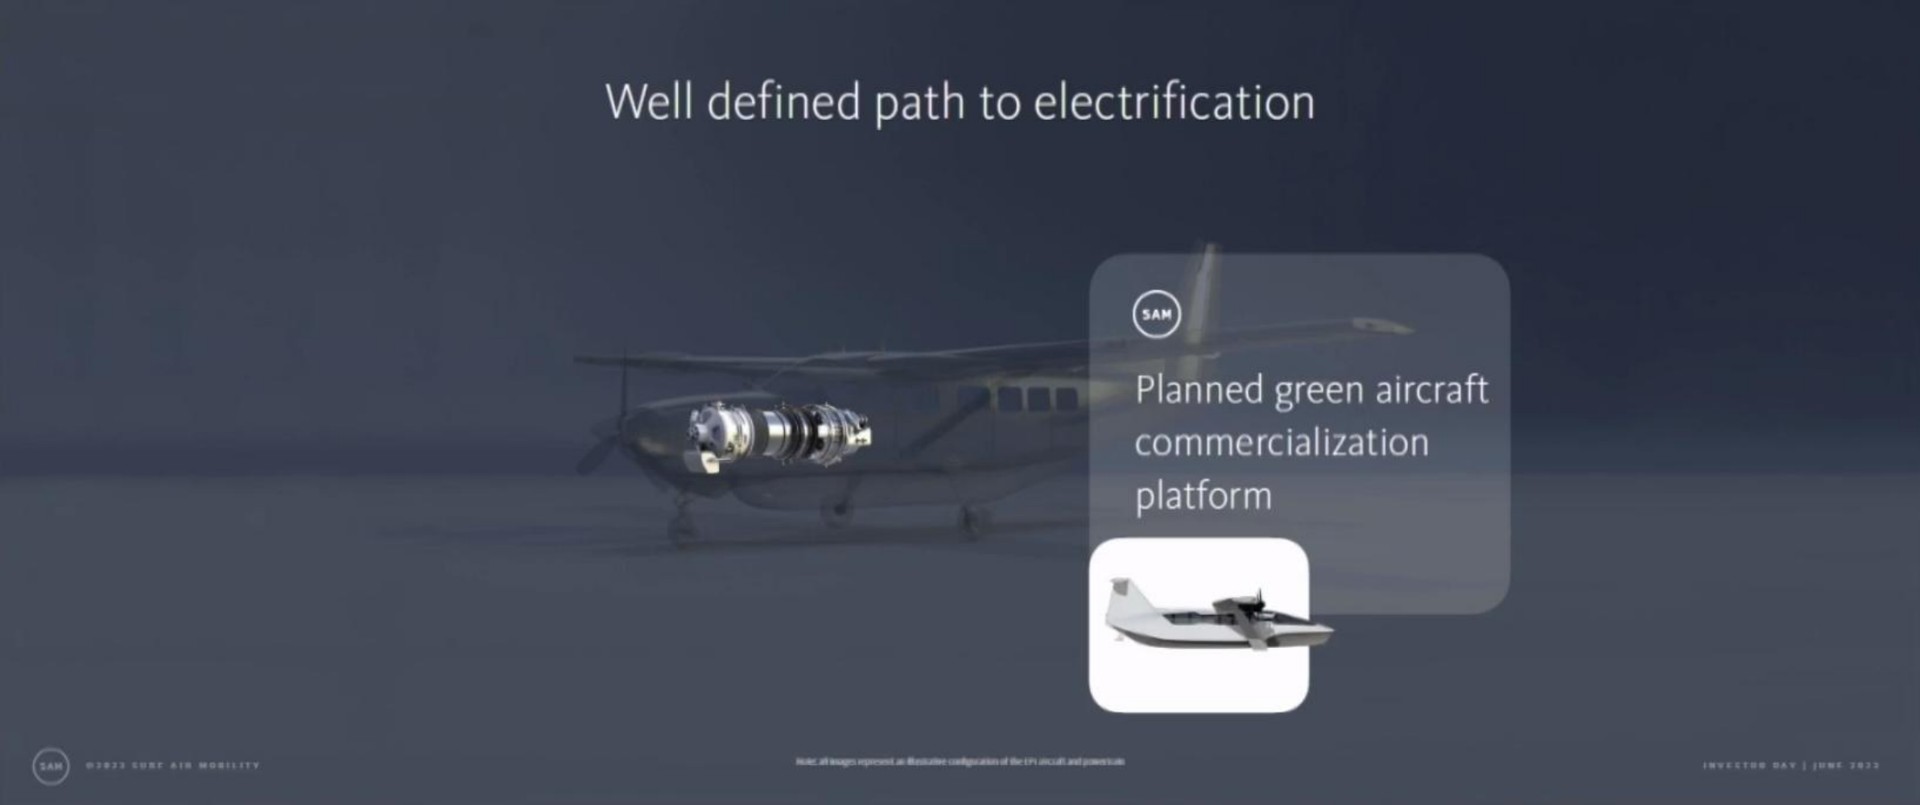 well defined path to electrification an lee planned green aircraft commercialization platform | Surf Air